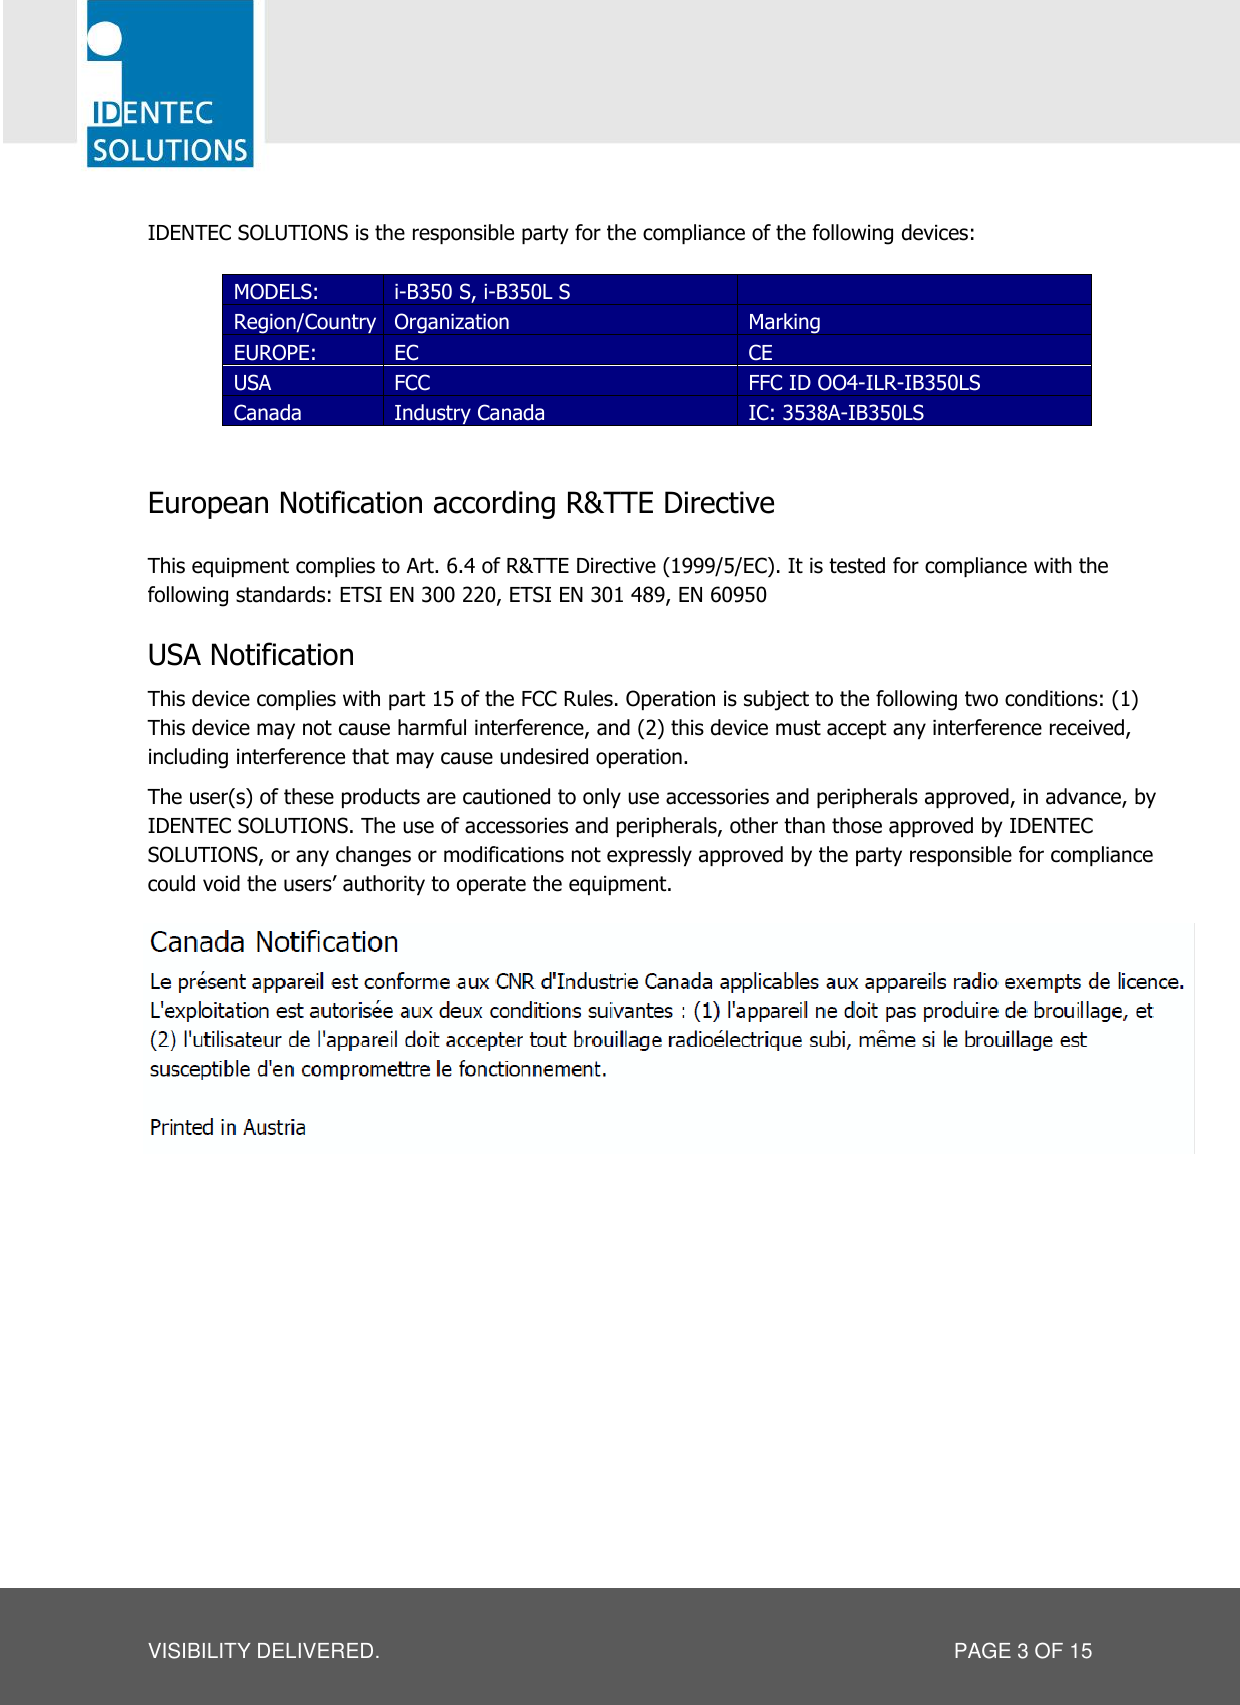  VISIBILITY DELIVERED.  PAGE 3 OF 15  IDENTEC SOLUTIONS is the responsible party for the compliance of the following devices:  MODELS: i-B350 S, i-B350L S  Region/Country Organization Marking EUROPE: EC  CE USA FCC FFC ID OO4-ILR-IB350LS Canada Industry Canada IC: 3538A-IB350LS   European Notification according R&amp;TTE Directive  This equipment complies to Art. 6.4 of R&amp;TTE Directive (1999/5/EC). It is tested for compliance with the following standards: ETSI EN 300 220, ETSI EN 301 489, EN 60950  USA Notification This device complies with part 15 of the FCC Rules. Operation is subject to the following two conditions: (1) This device may not cause harmful interference, and (2) this device must accept any interference received, including interference that may cause undesired operation. The user(s) of these products are cautioned to only use accessories and peripherals approved, in advance, by IDENTEC SOLUTIONS. The use of accessories and peripherals, other than those approved by IDENTEC SOLUTIONS, or any changes or modifications not expressly approved by the party responsible for compliance could void the users’ authority to operate the equipment.  The device has been tested and found to comply with the limits for a Class A digital device, pursuant to part 15 of the FCC Rules. These limits are designed to provide reasonable protection against harmful interference when the equipment is operated in a commercial environment. This equipment generates, uses, and can radiate radio frequency energy and, if not installed and used in accordance with the instruction manual, may cause harmful interference to radio communications. Operation of this equipment in a residential area is likely to cause harmful interference in which case the user will be required to correct the interference at his own expense.     